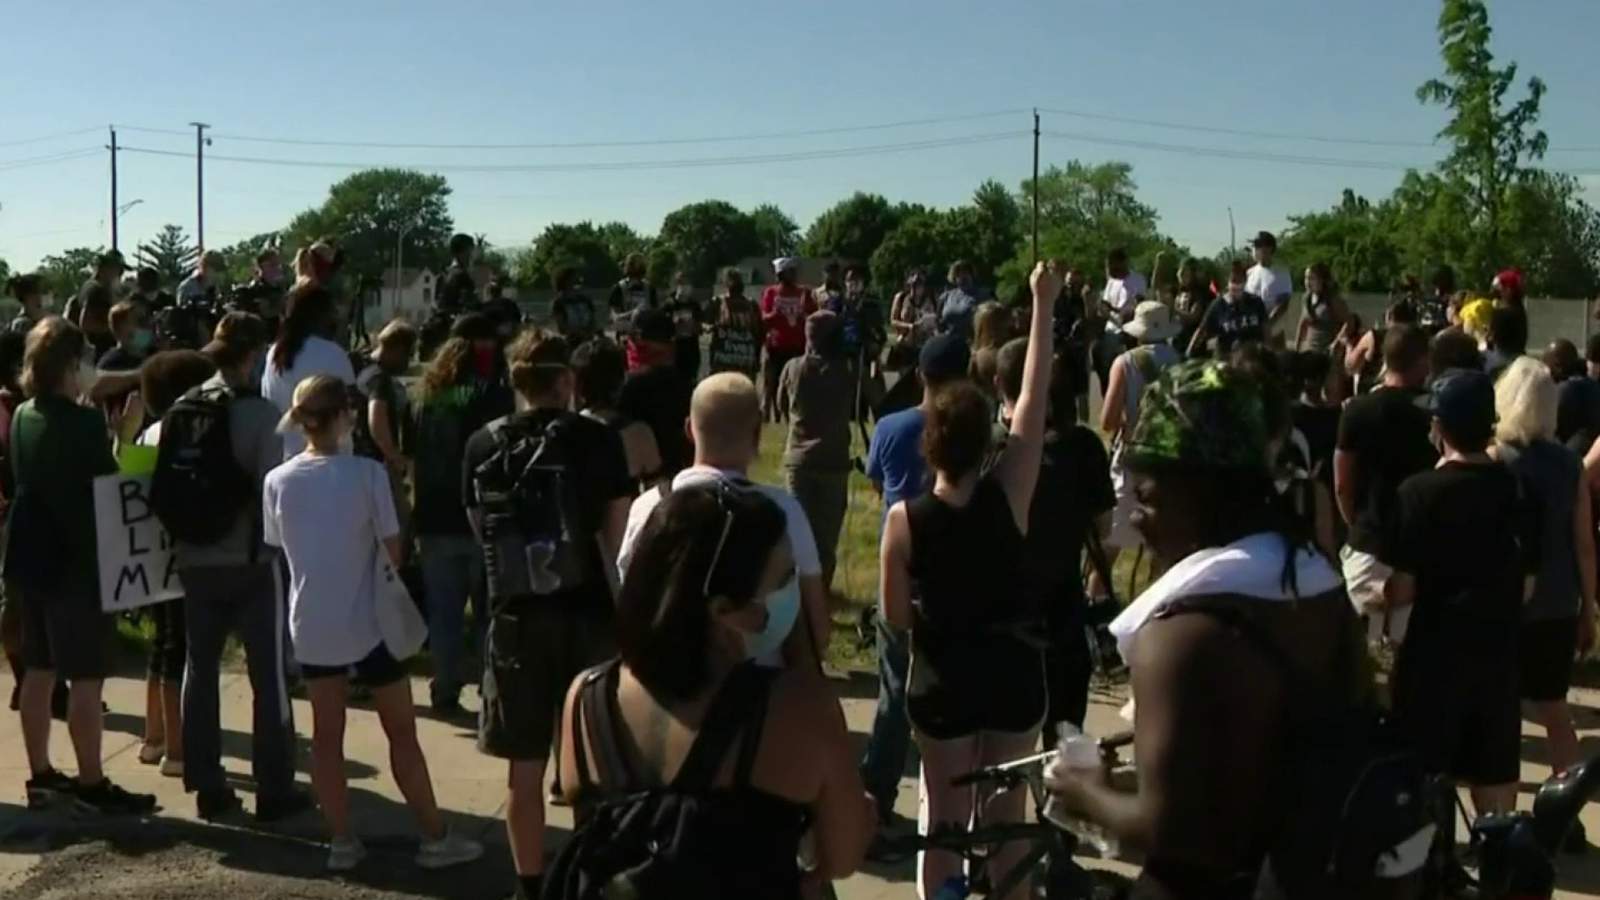 Protesters call for Detroit officer who drove through crowd to be fired, face charges